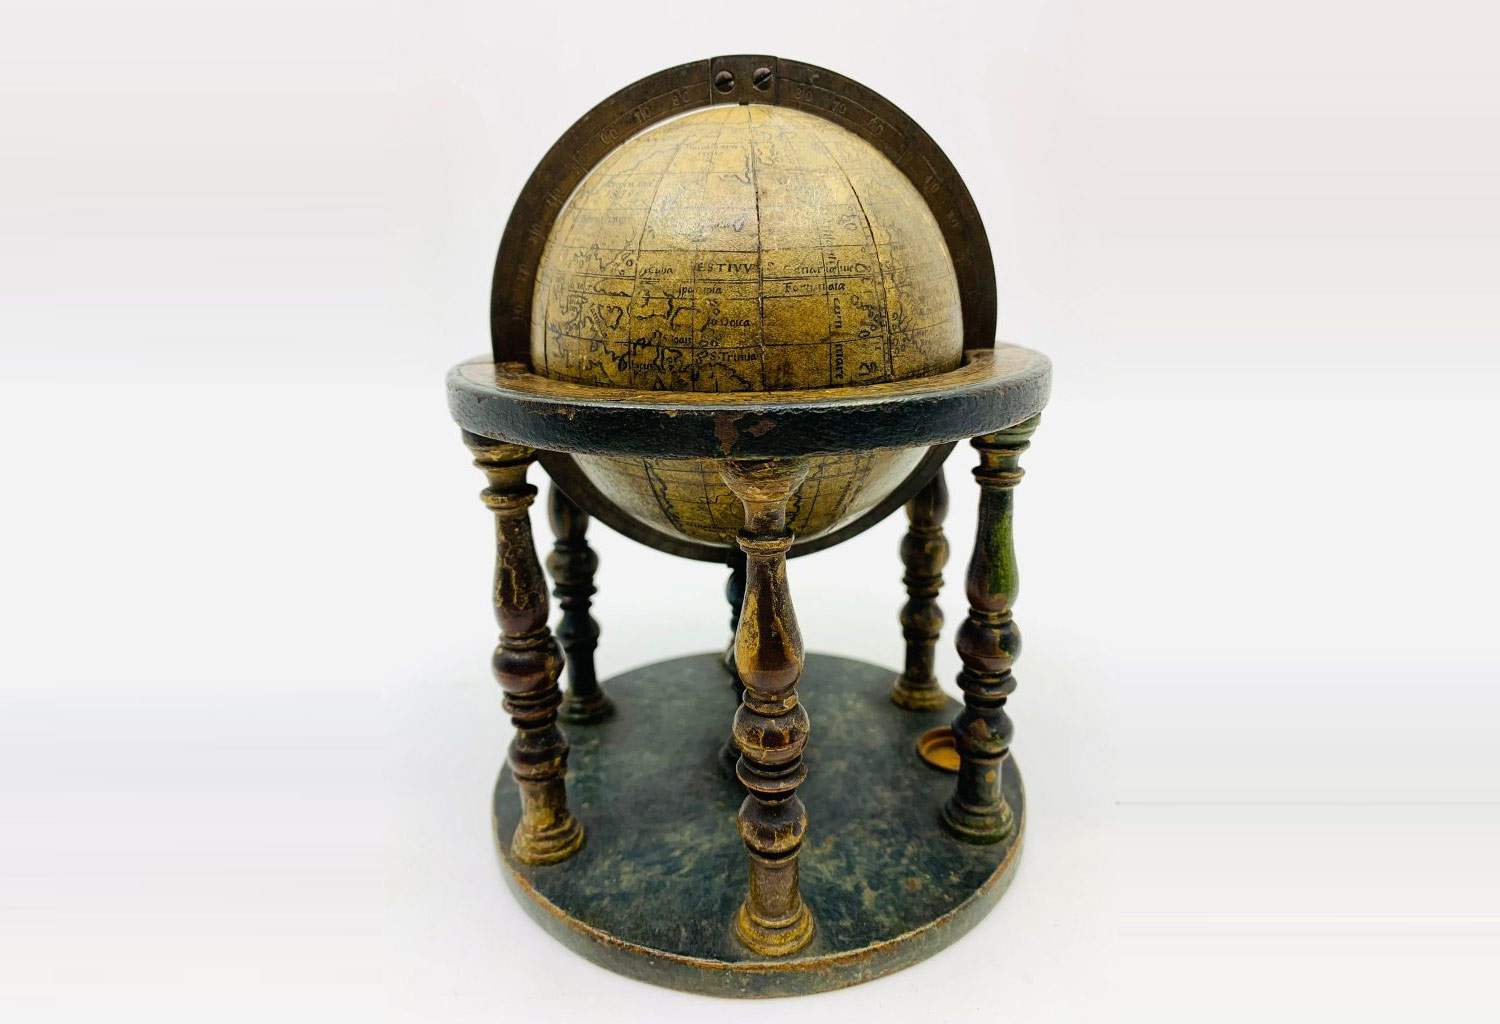 Woman buys a globe for 175 , but it is a rare item and is auctioned at 136,000